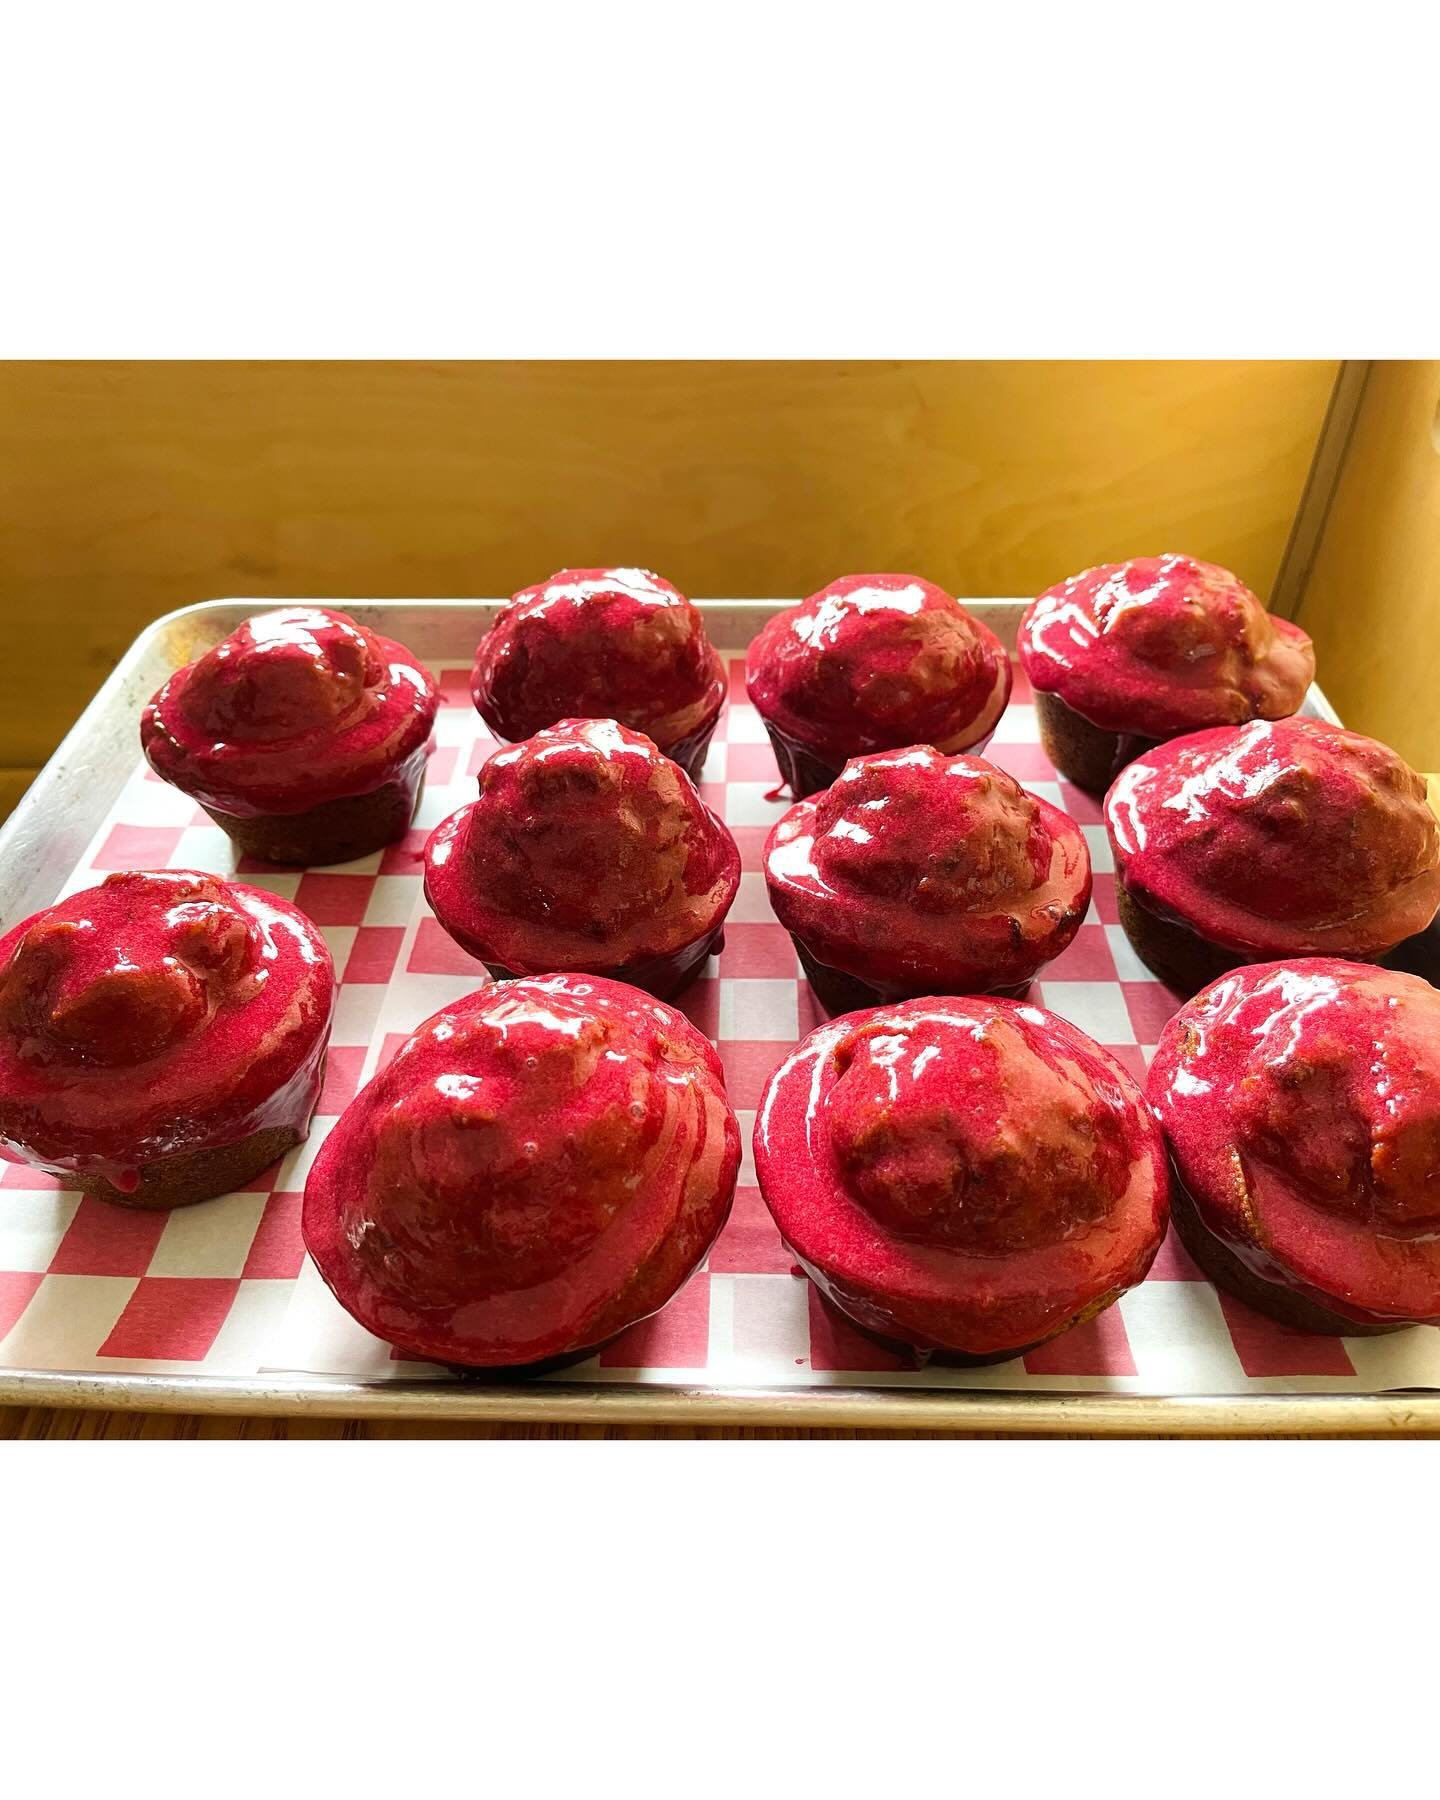 this tray excites me! 🫦🫦🫦 feels like #breakfastlipstick

@saam.robinson made these zucchini walnut muffins with brambleberry glaze! 🫨

Also in the case today, *back by popular demand* $20 mini lavender cakes! It&rsquo;s lavender milk tea sponge c